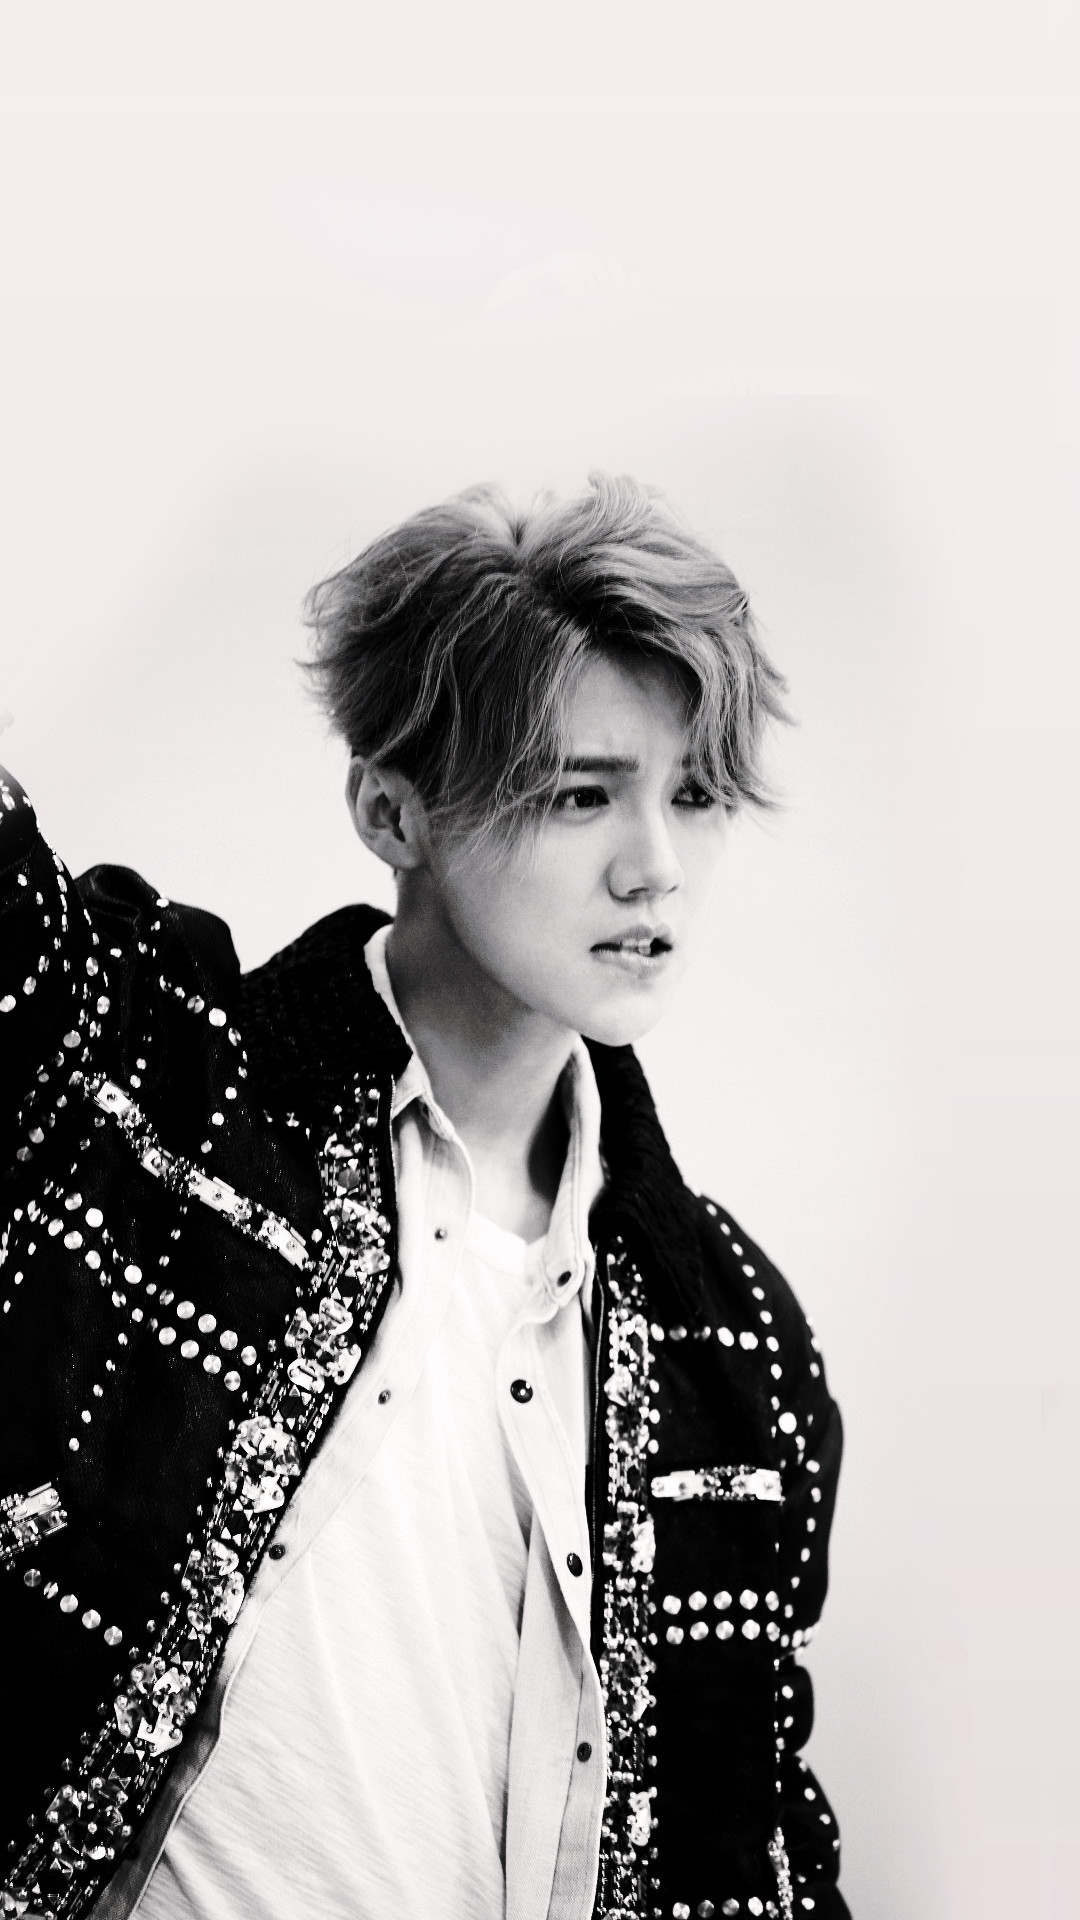 1080x1920 Free Spirit, Polyvore, Luhan, The O'jays, The Day, Exotic, Gallery, The  Singer, Kpop